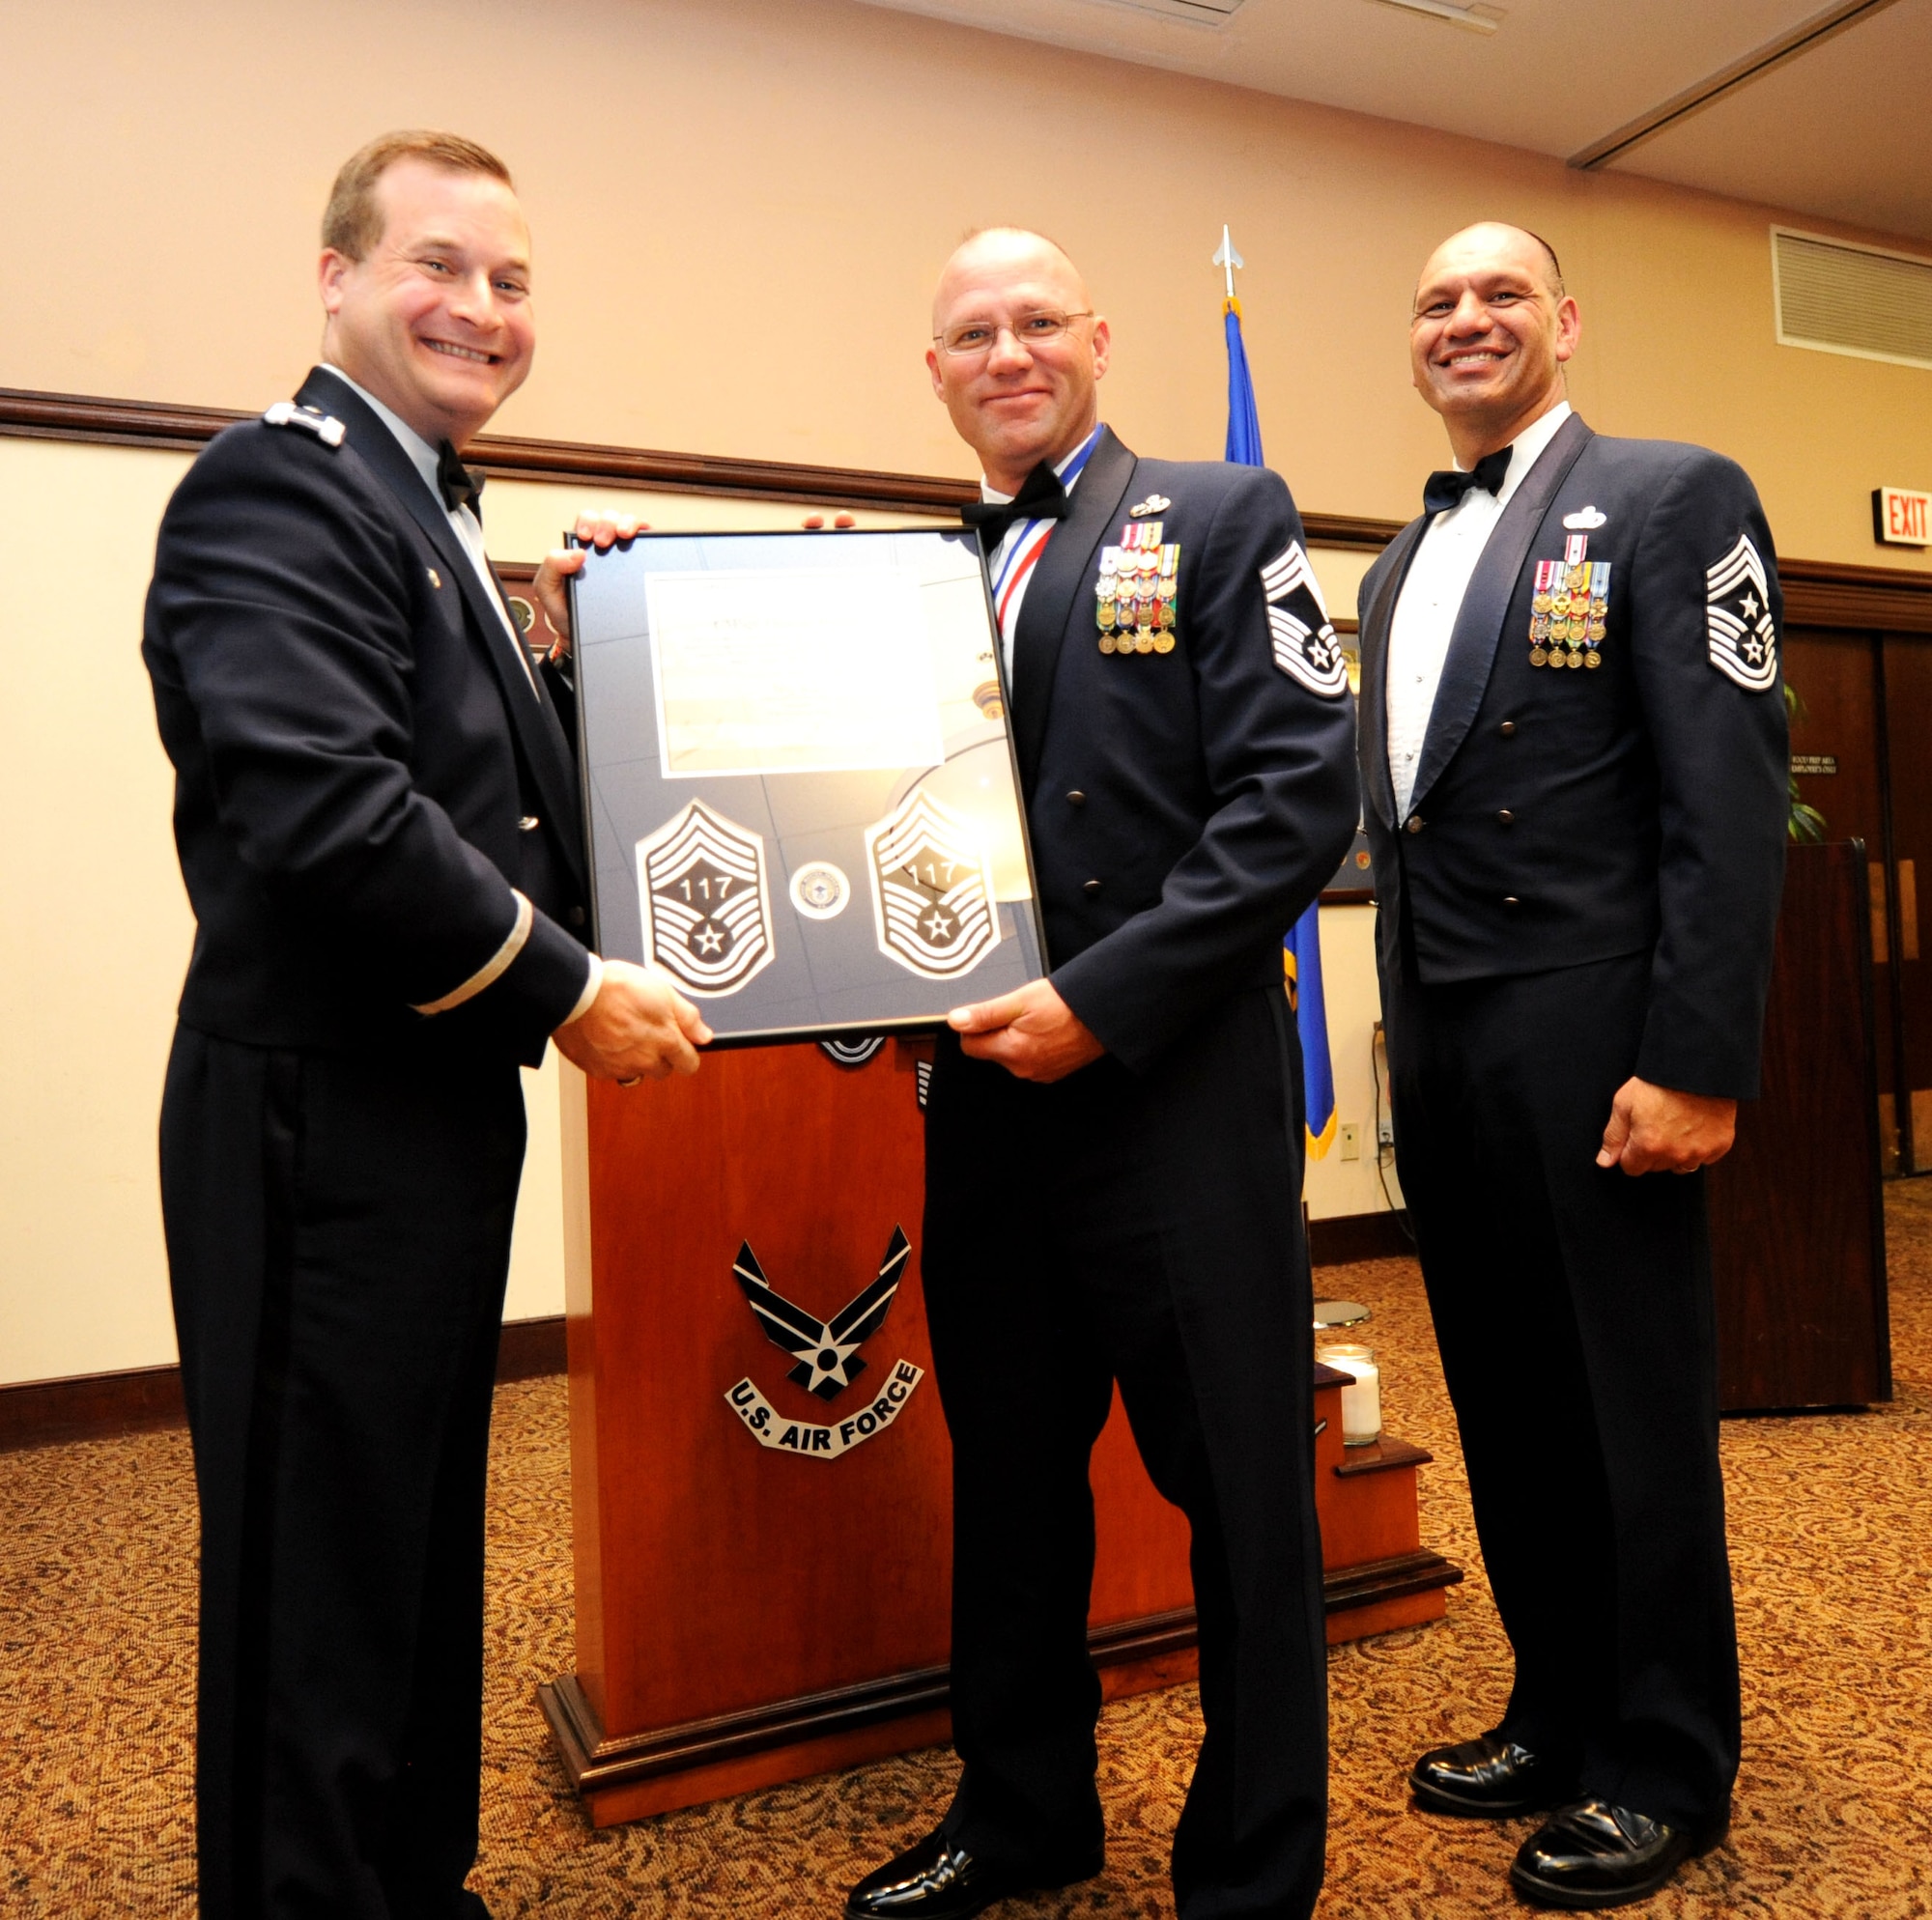 Col. Phil Stewart (left), 9th Reconnaissance Wing commander, and Chief Master Sgt. Robert White, 9th Reconnaissance Wing command chief, present Chief Master Sgt. Thomas Jenkins, 12th Aircraft Maintenance Unit superintendant, a plaque commemorating his promotion at the Recce Point Club on Beale Air Force Base, Calif., April 8, 2013. (U.S. Air Force photo by Airman 1st Class Bobby Cummings/Released)